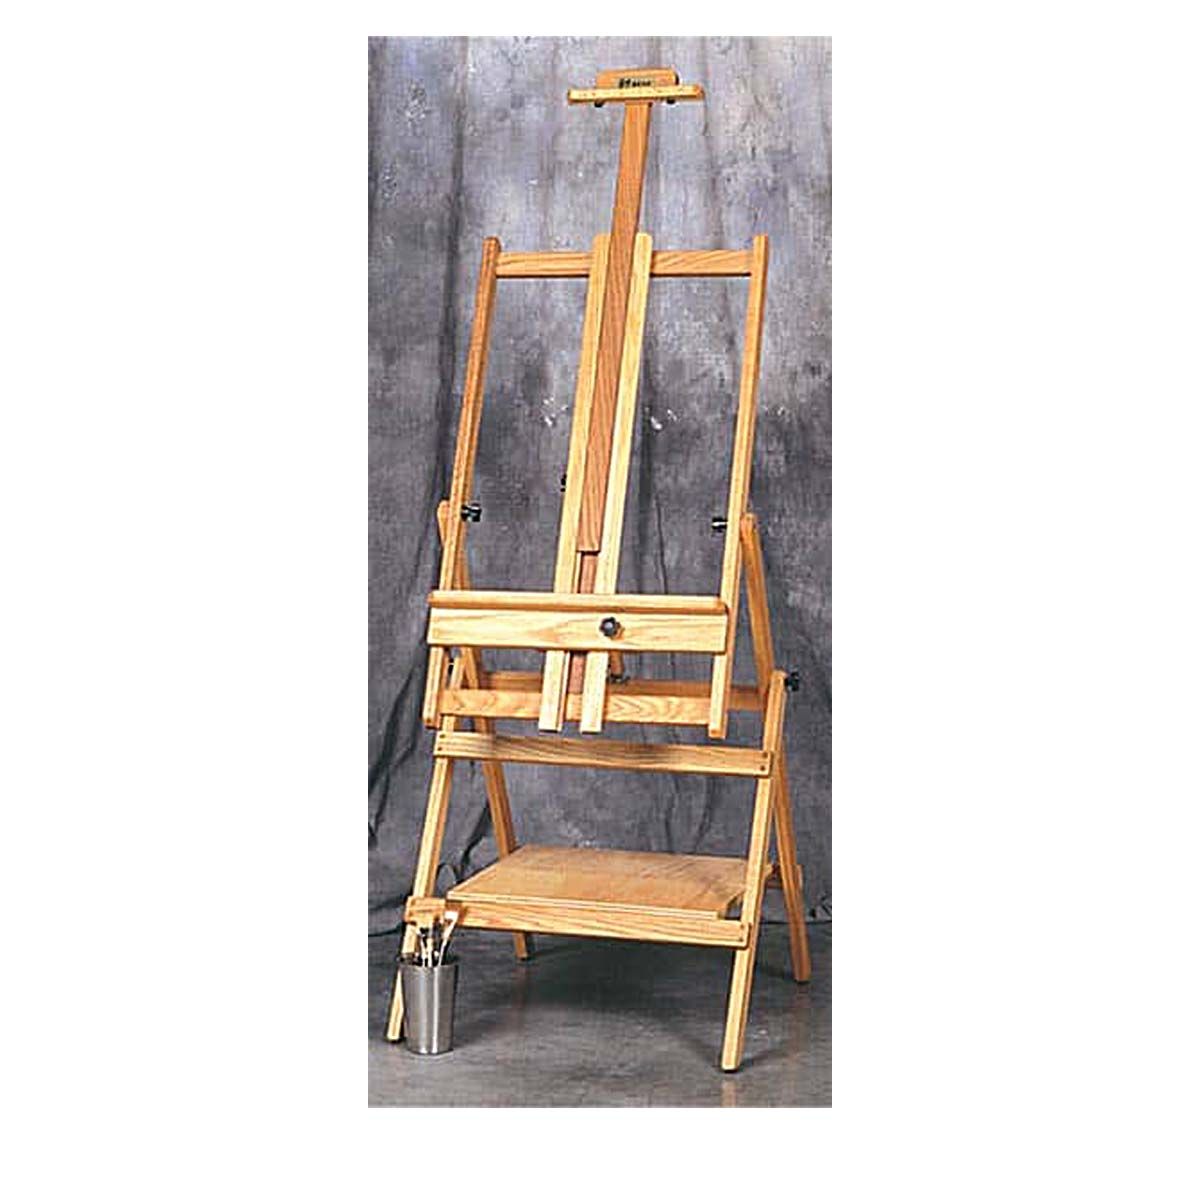 70-Piece Oil Painting Set with Floor Easel, Table Easel, 24 Oil